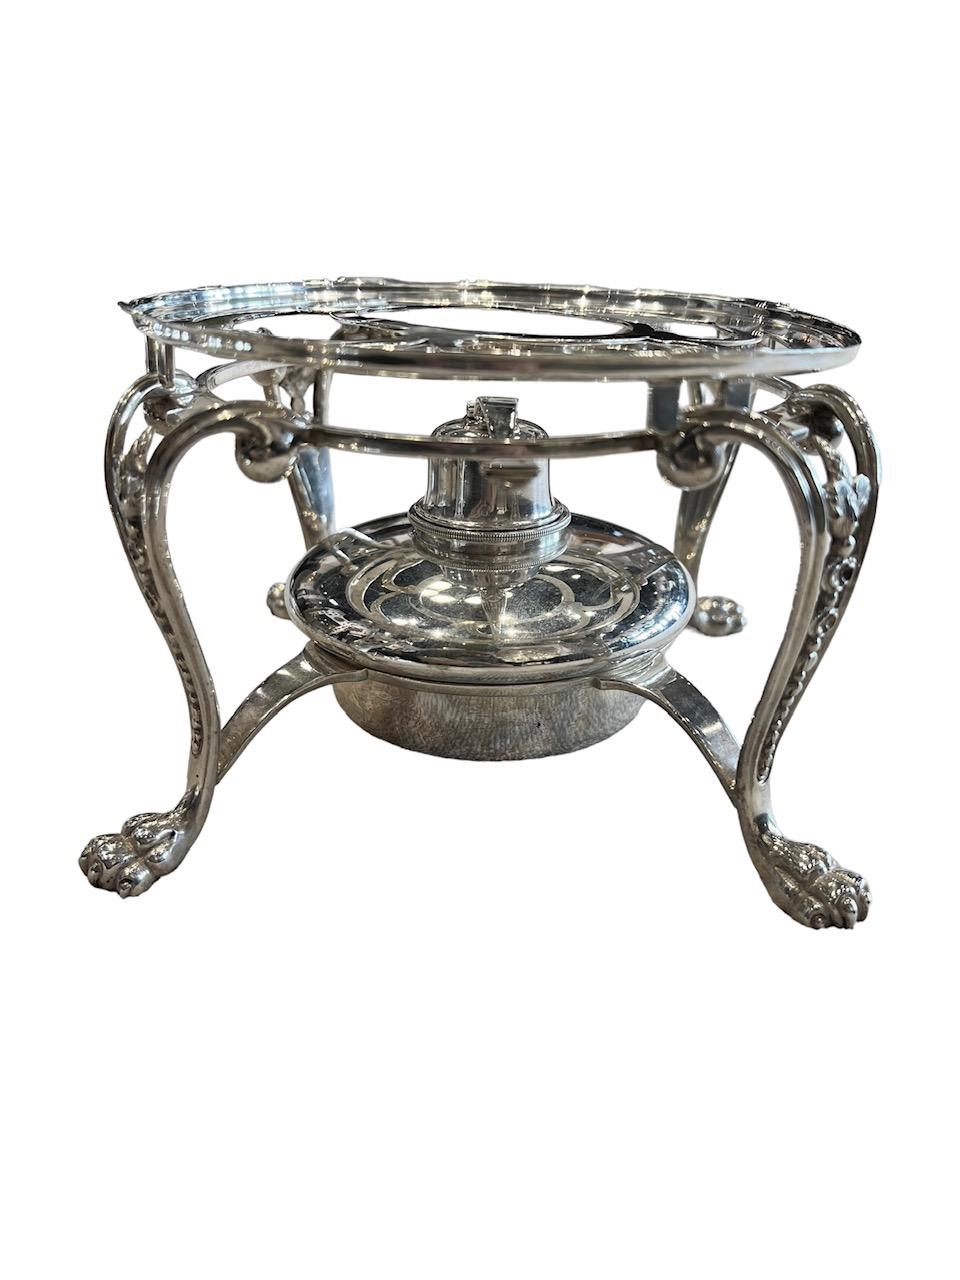 Tiffany and Co Sterling Silver Chafing Dish with Warmer, 19th Century For Sale 1